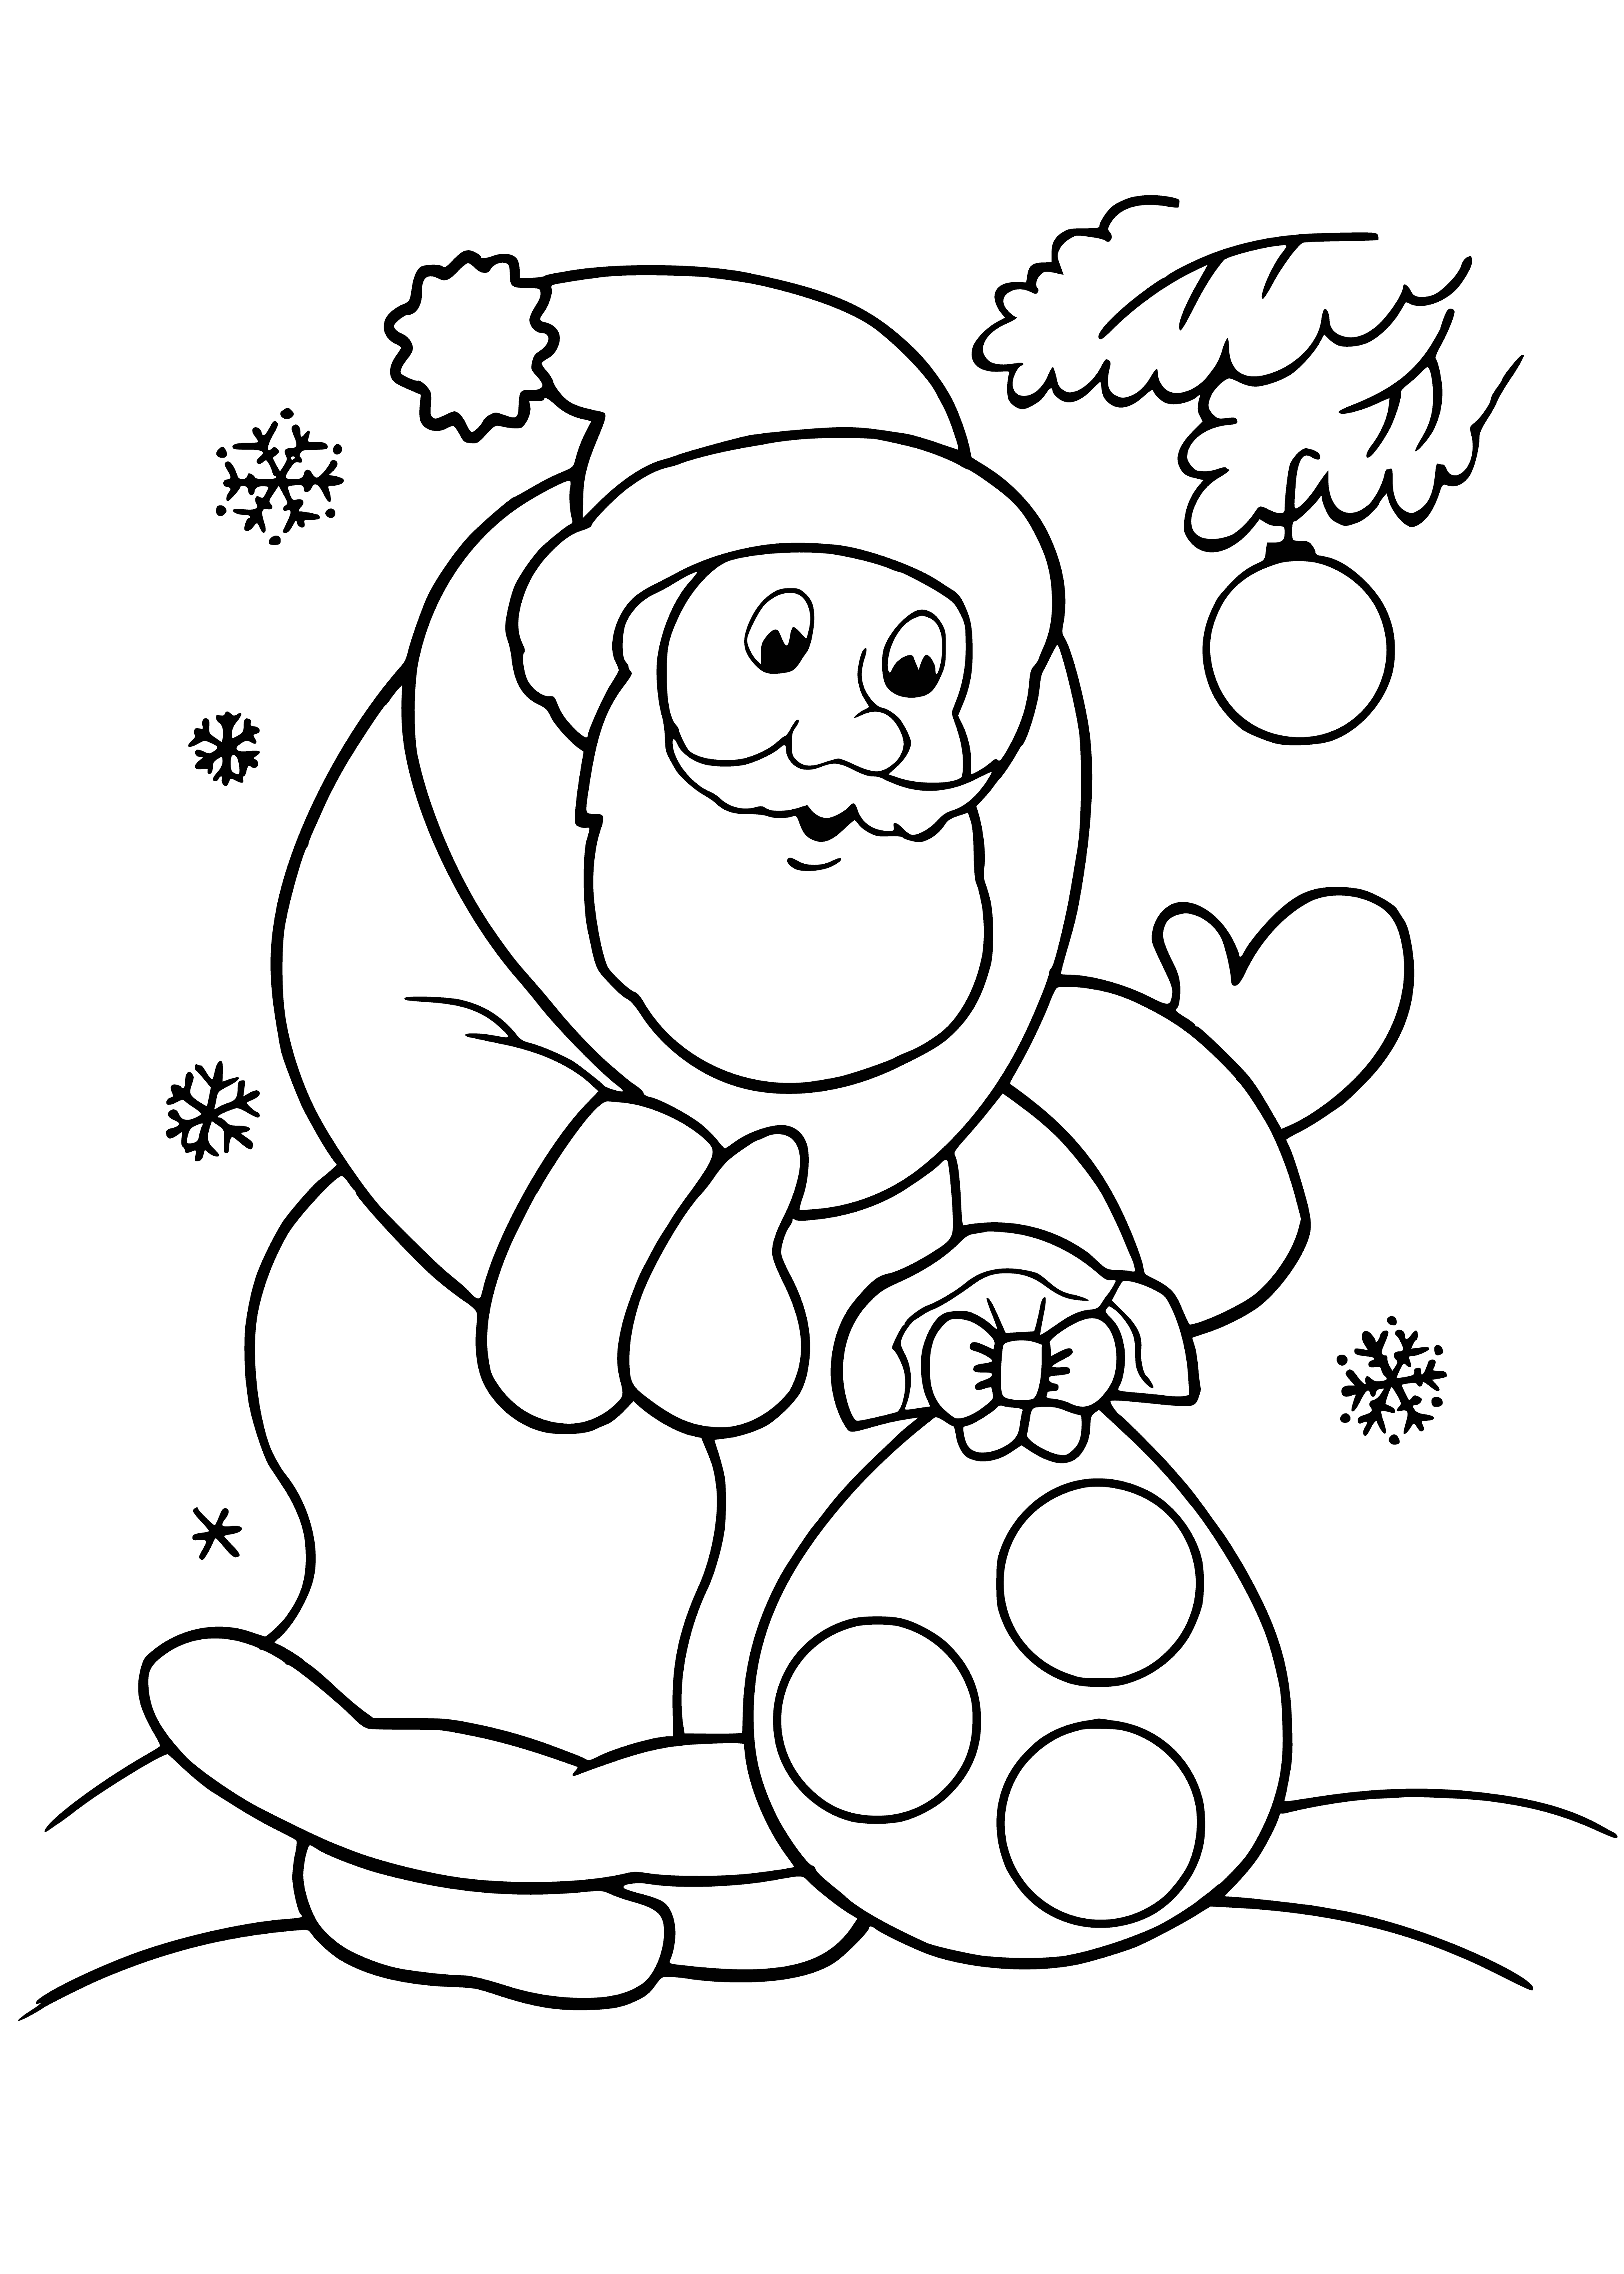 coloring page: A jolly old man in a red suit holding a sack of presents visits during the holidays.